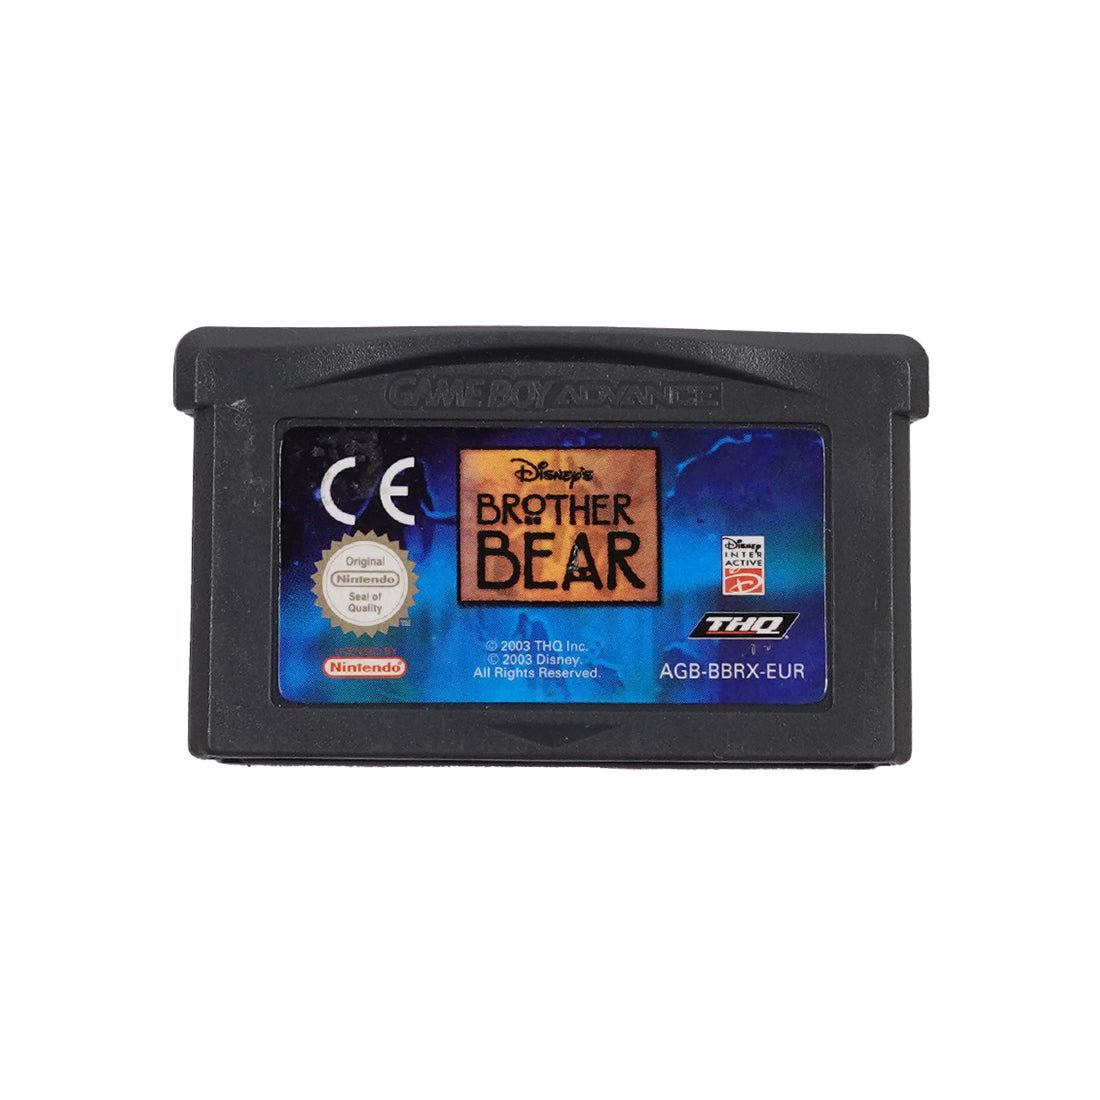 (Pre-Owned) Brother Bear - Gameboy Advance - Store 974 | ستور ٩٧٤